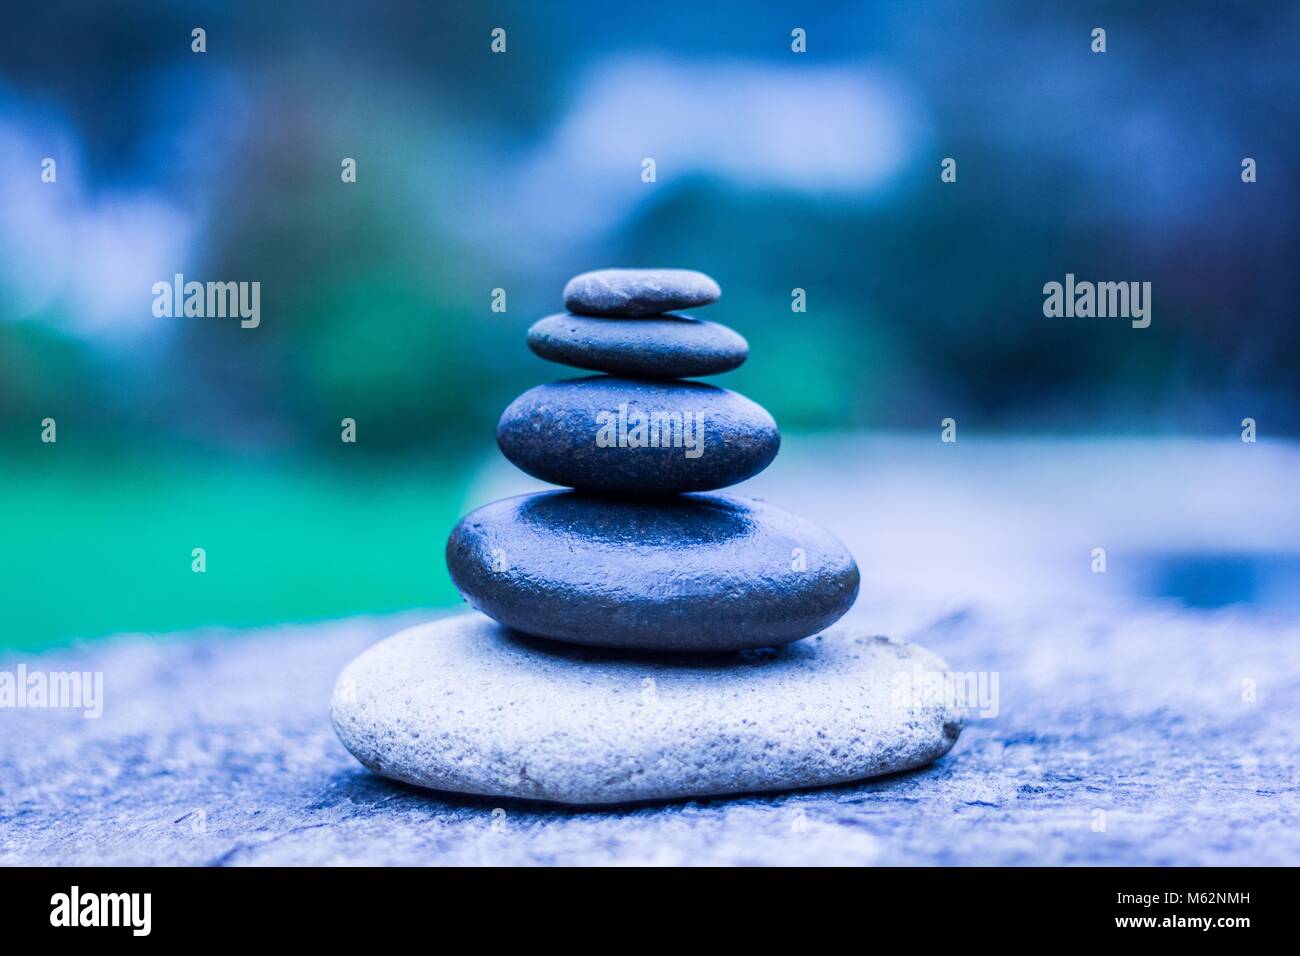 Five zen stones in equilibrium in blue cold tones. Relax, peaceful concept Stock Photo